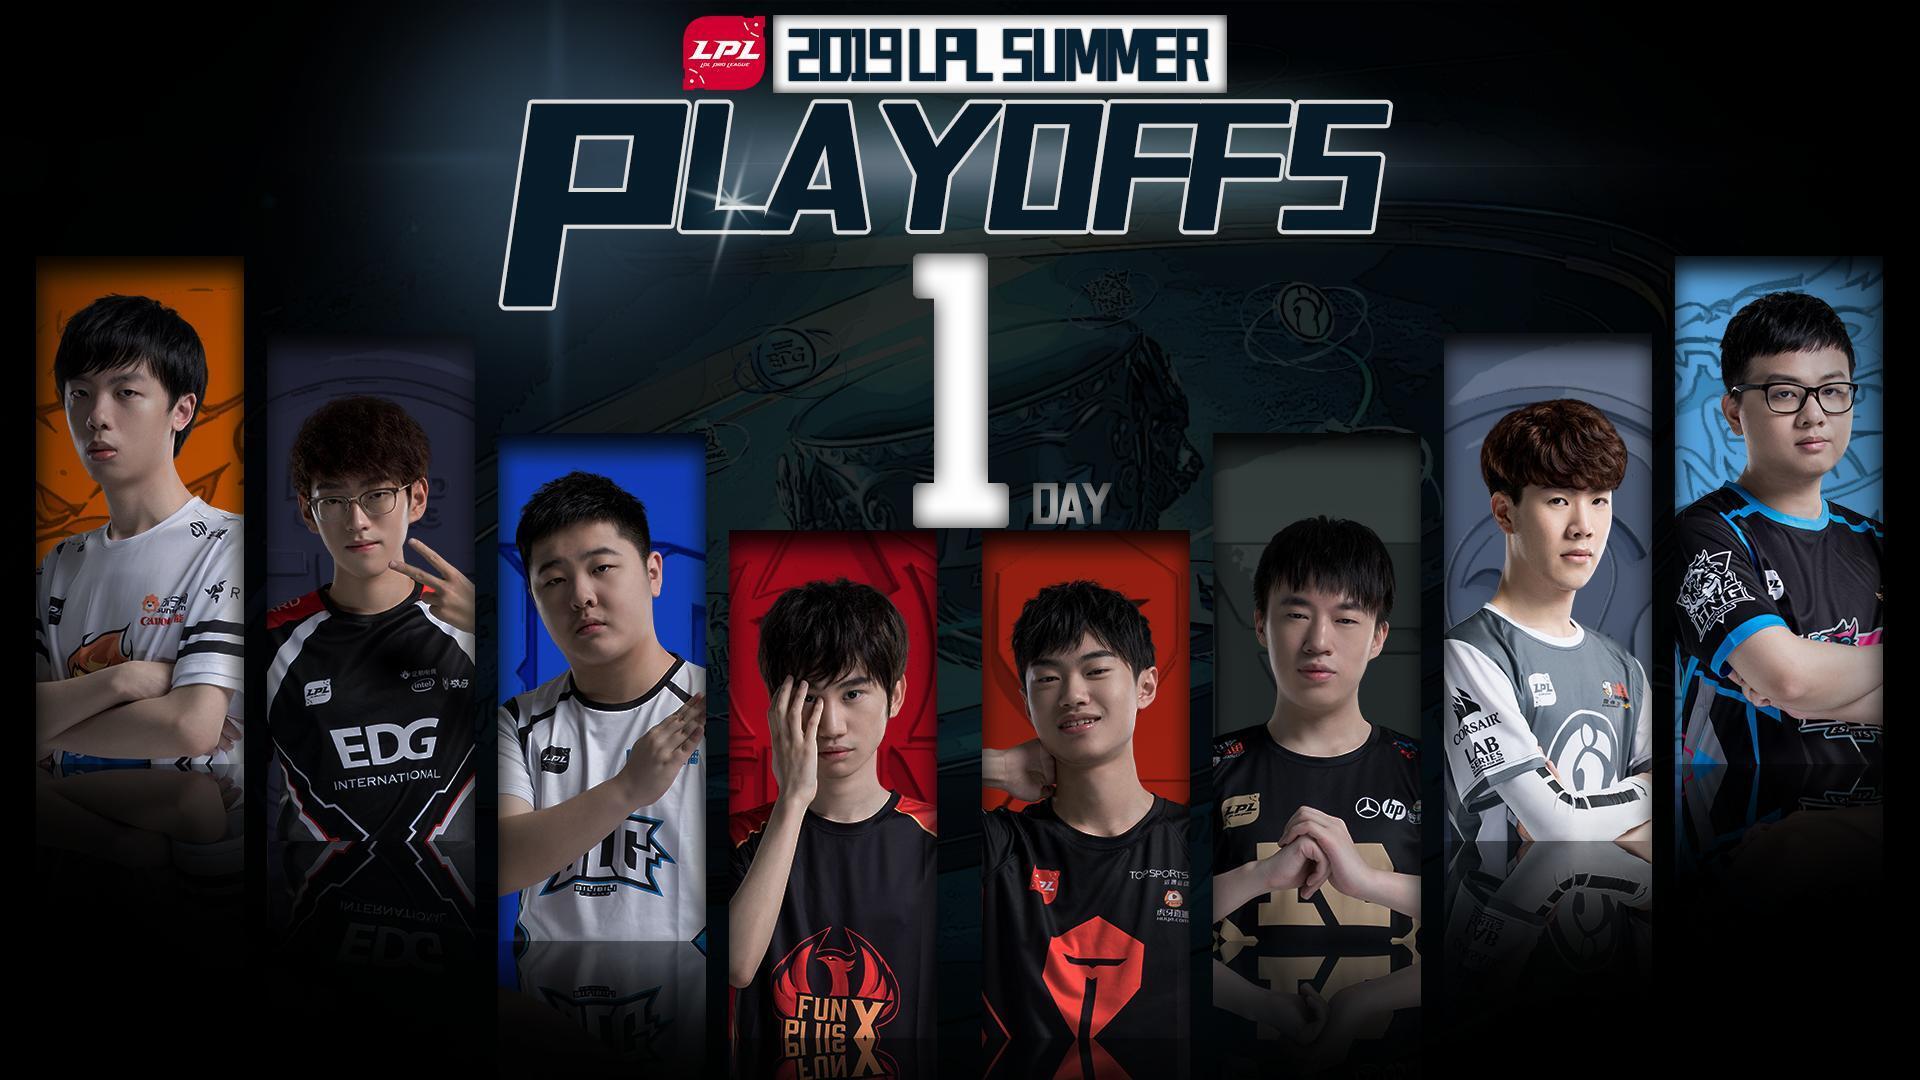 The LPL Summer playoff teams are ready to compete. (Image via @lplenglish / Twitter)